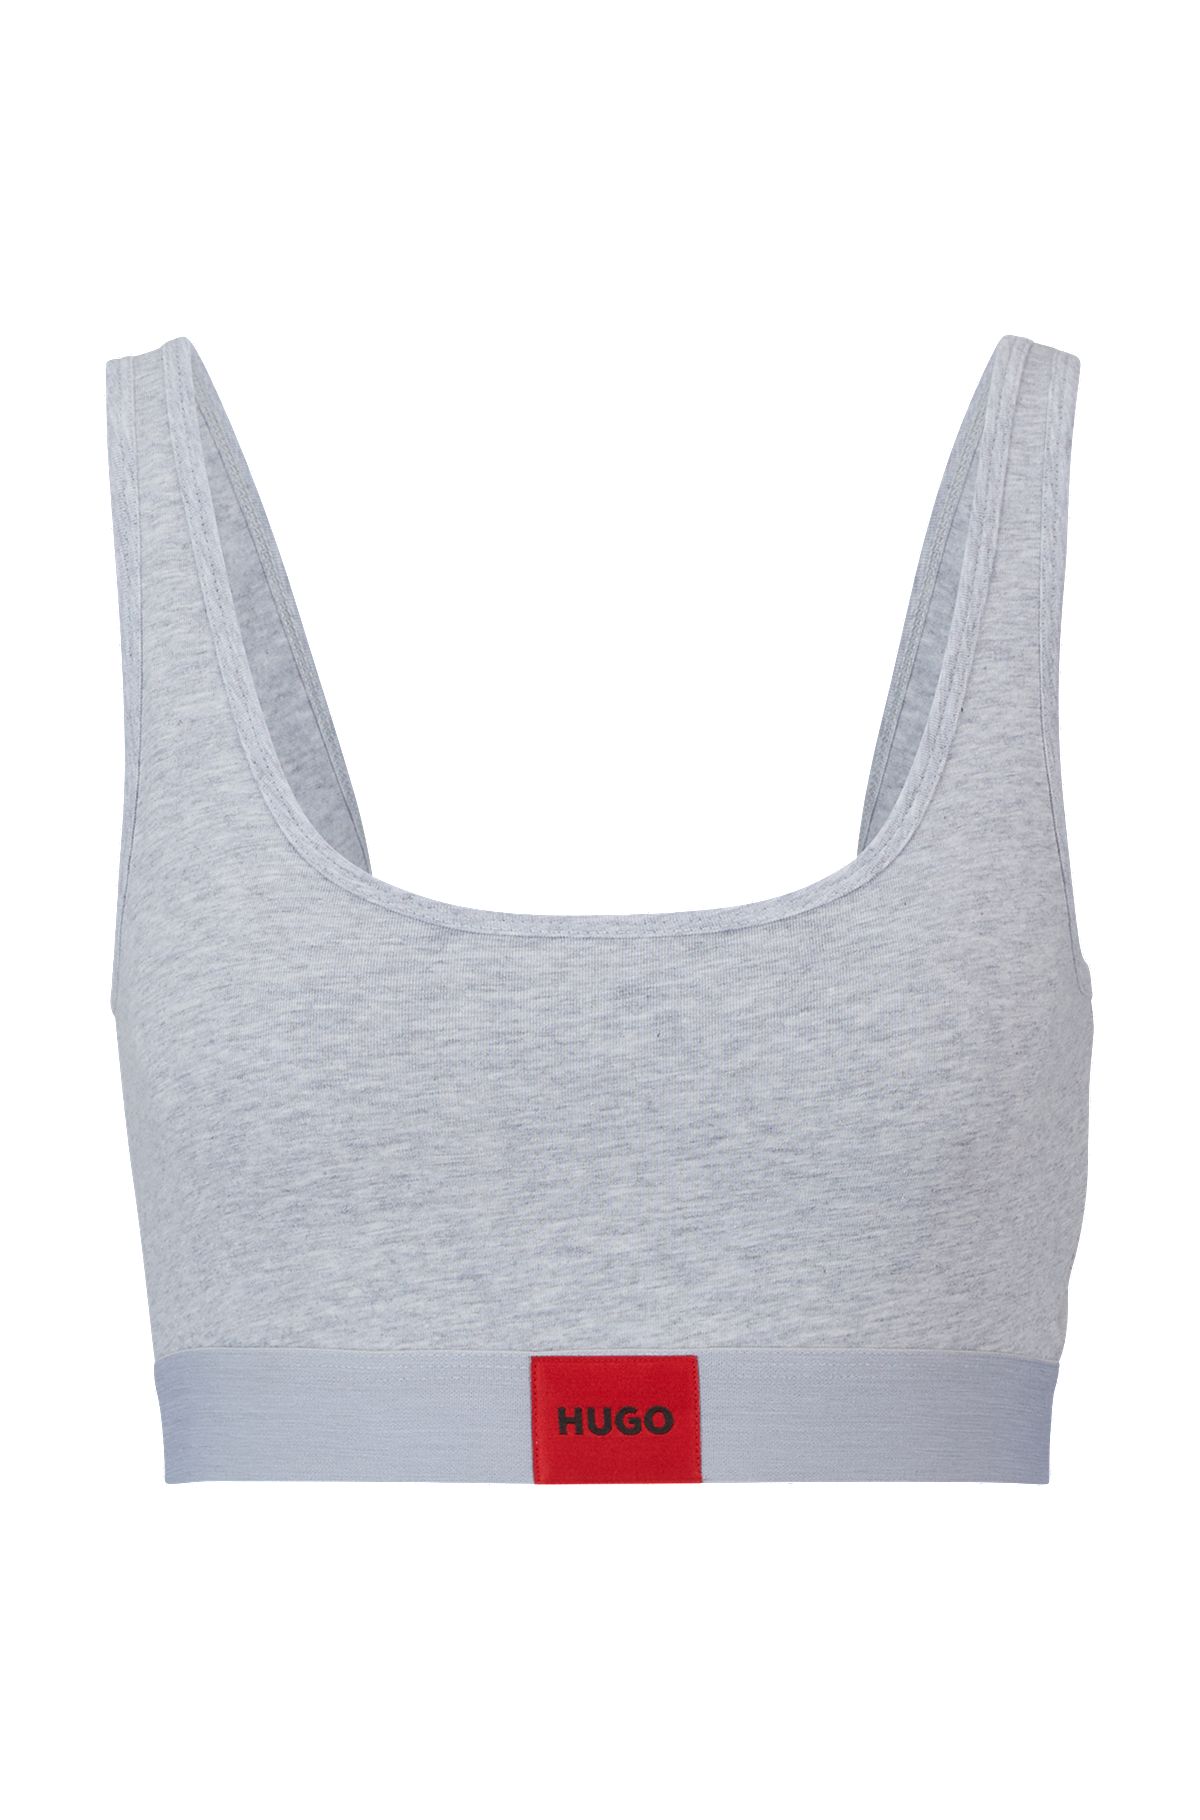 HUGO - label red with bralette Stretch-cotton logo